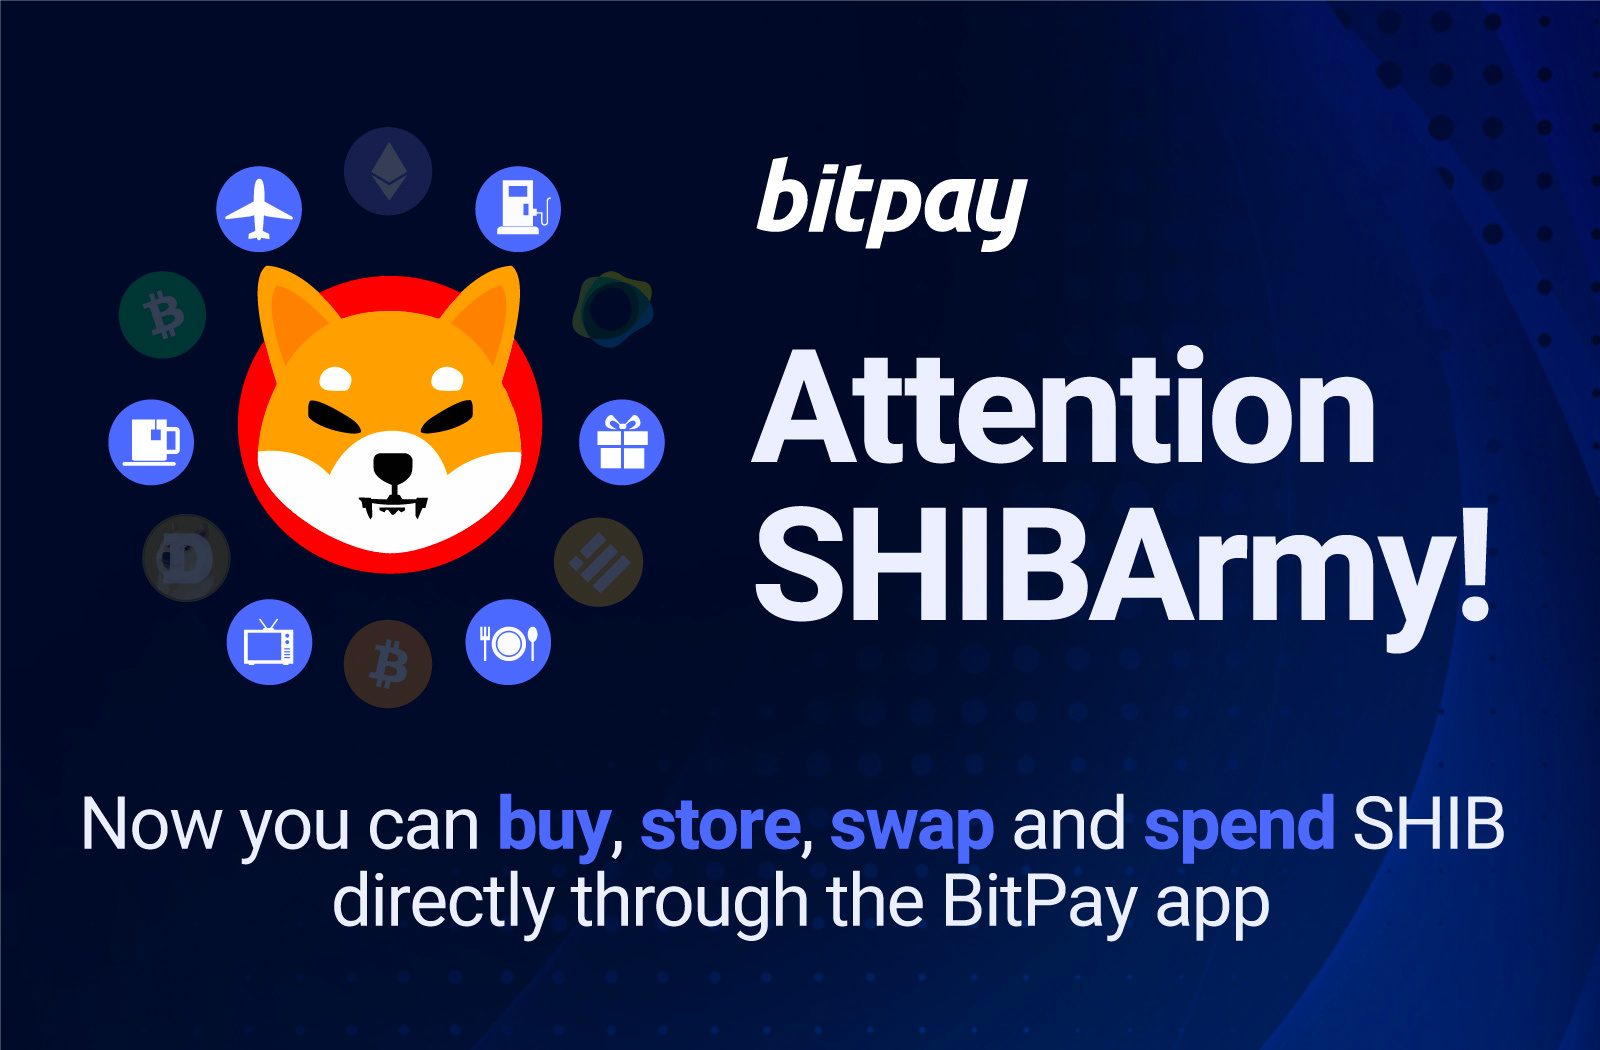 BitPay Supports Shiba Inu (SHIB): Buy, Store, Swap, and Spend with BitPay